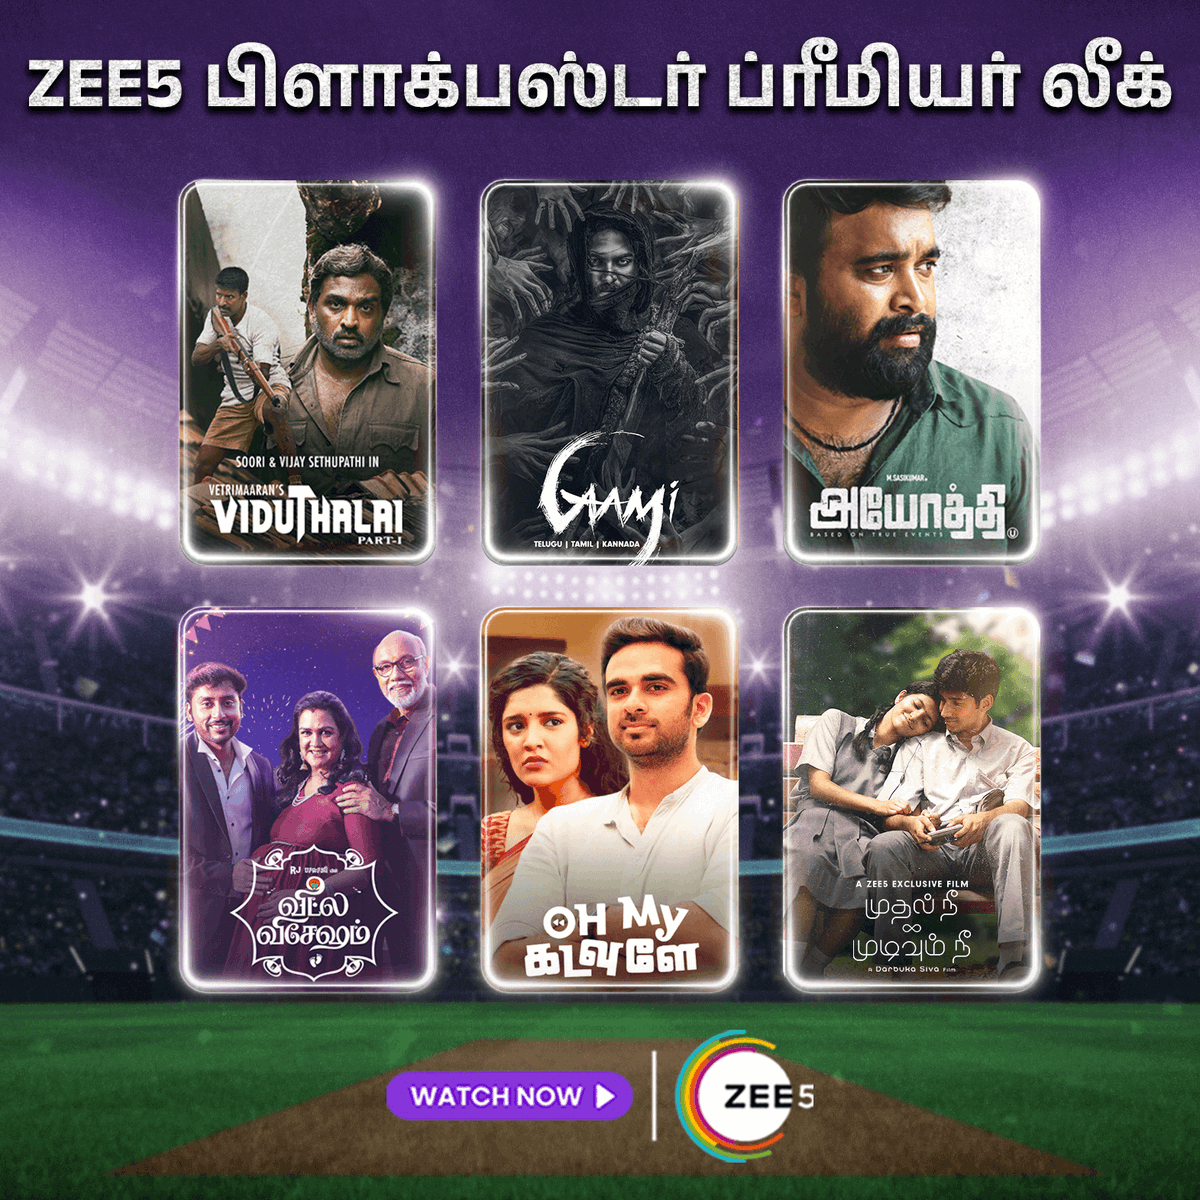 Play your favorite movies and series with the ZEE5 blockbuster Premier League on!

Watch your favourite movies and shows anywhere anytime only on ZEE5🍿

#Viduthalai #OhMyKadavule #Gaami #Ayothi #ZEE5Tamil #ZEE5 #WatchOnZEE5 #VijaySethupathi #AshokSelvan